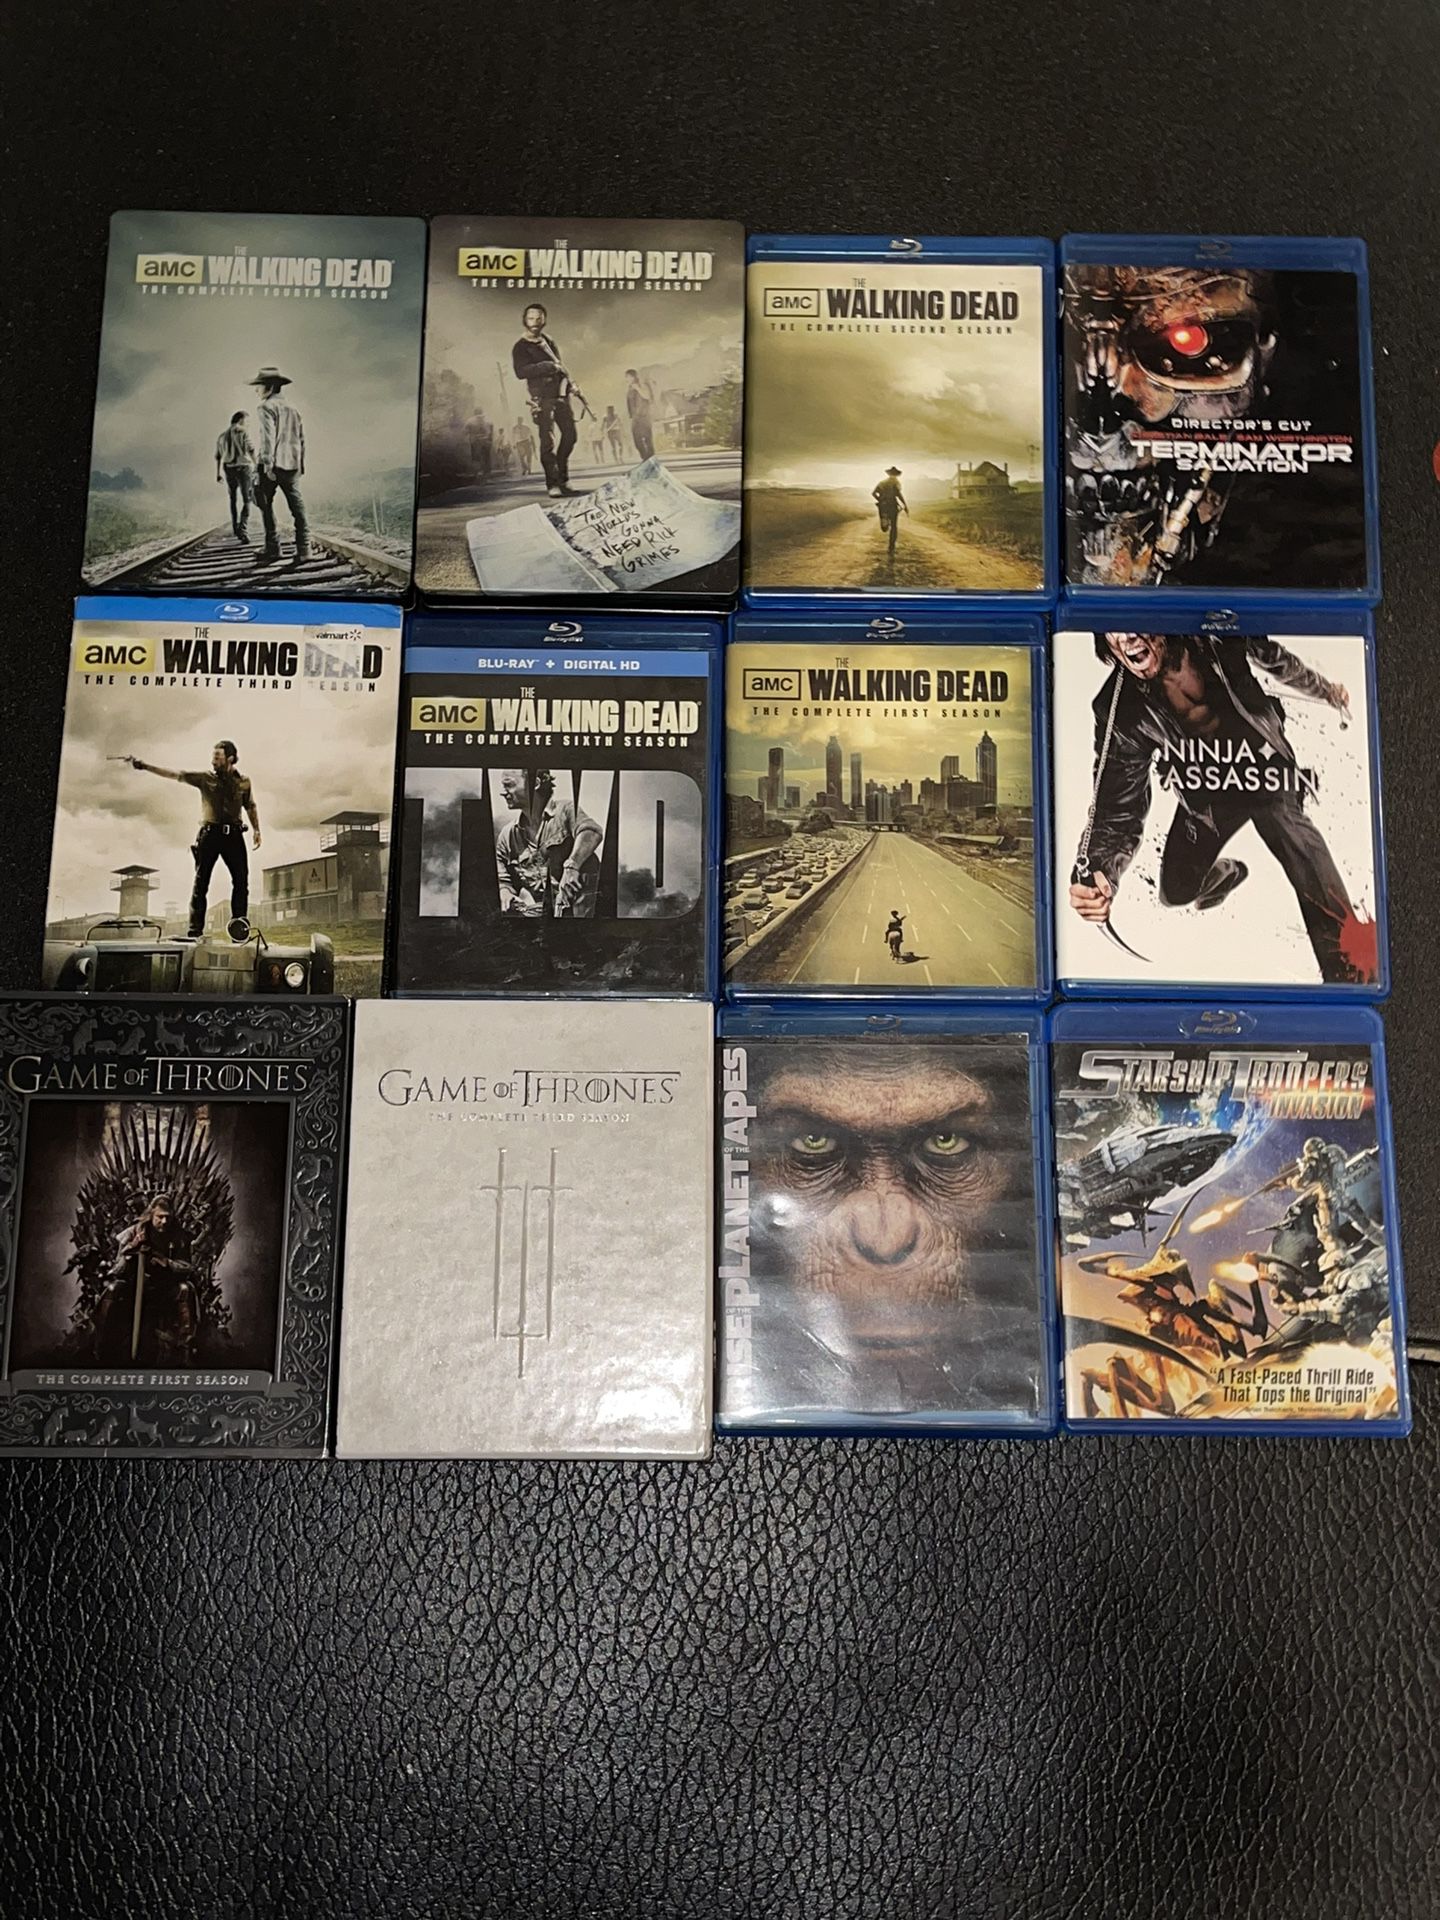 Blu-Ray Box Sets Collectors Tins 6 Full The Walking Dead Seasons & 2 Game Of Thrones Seasons Plus For More Blu-Rays 12 Total